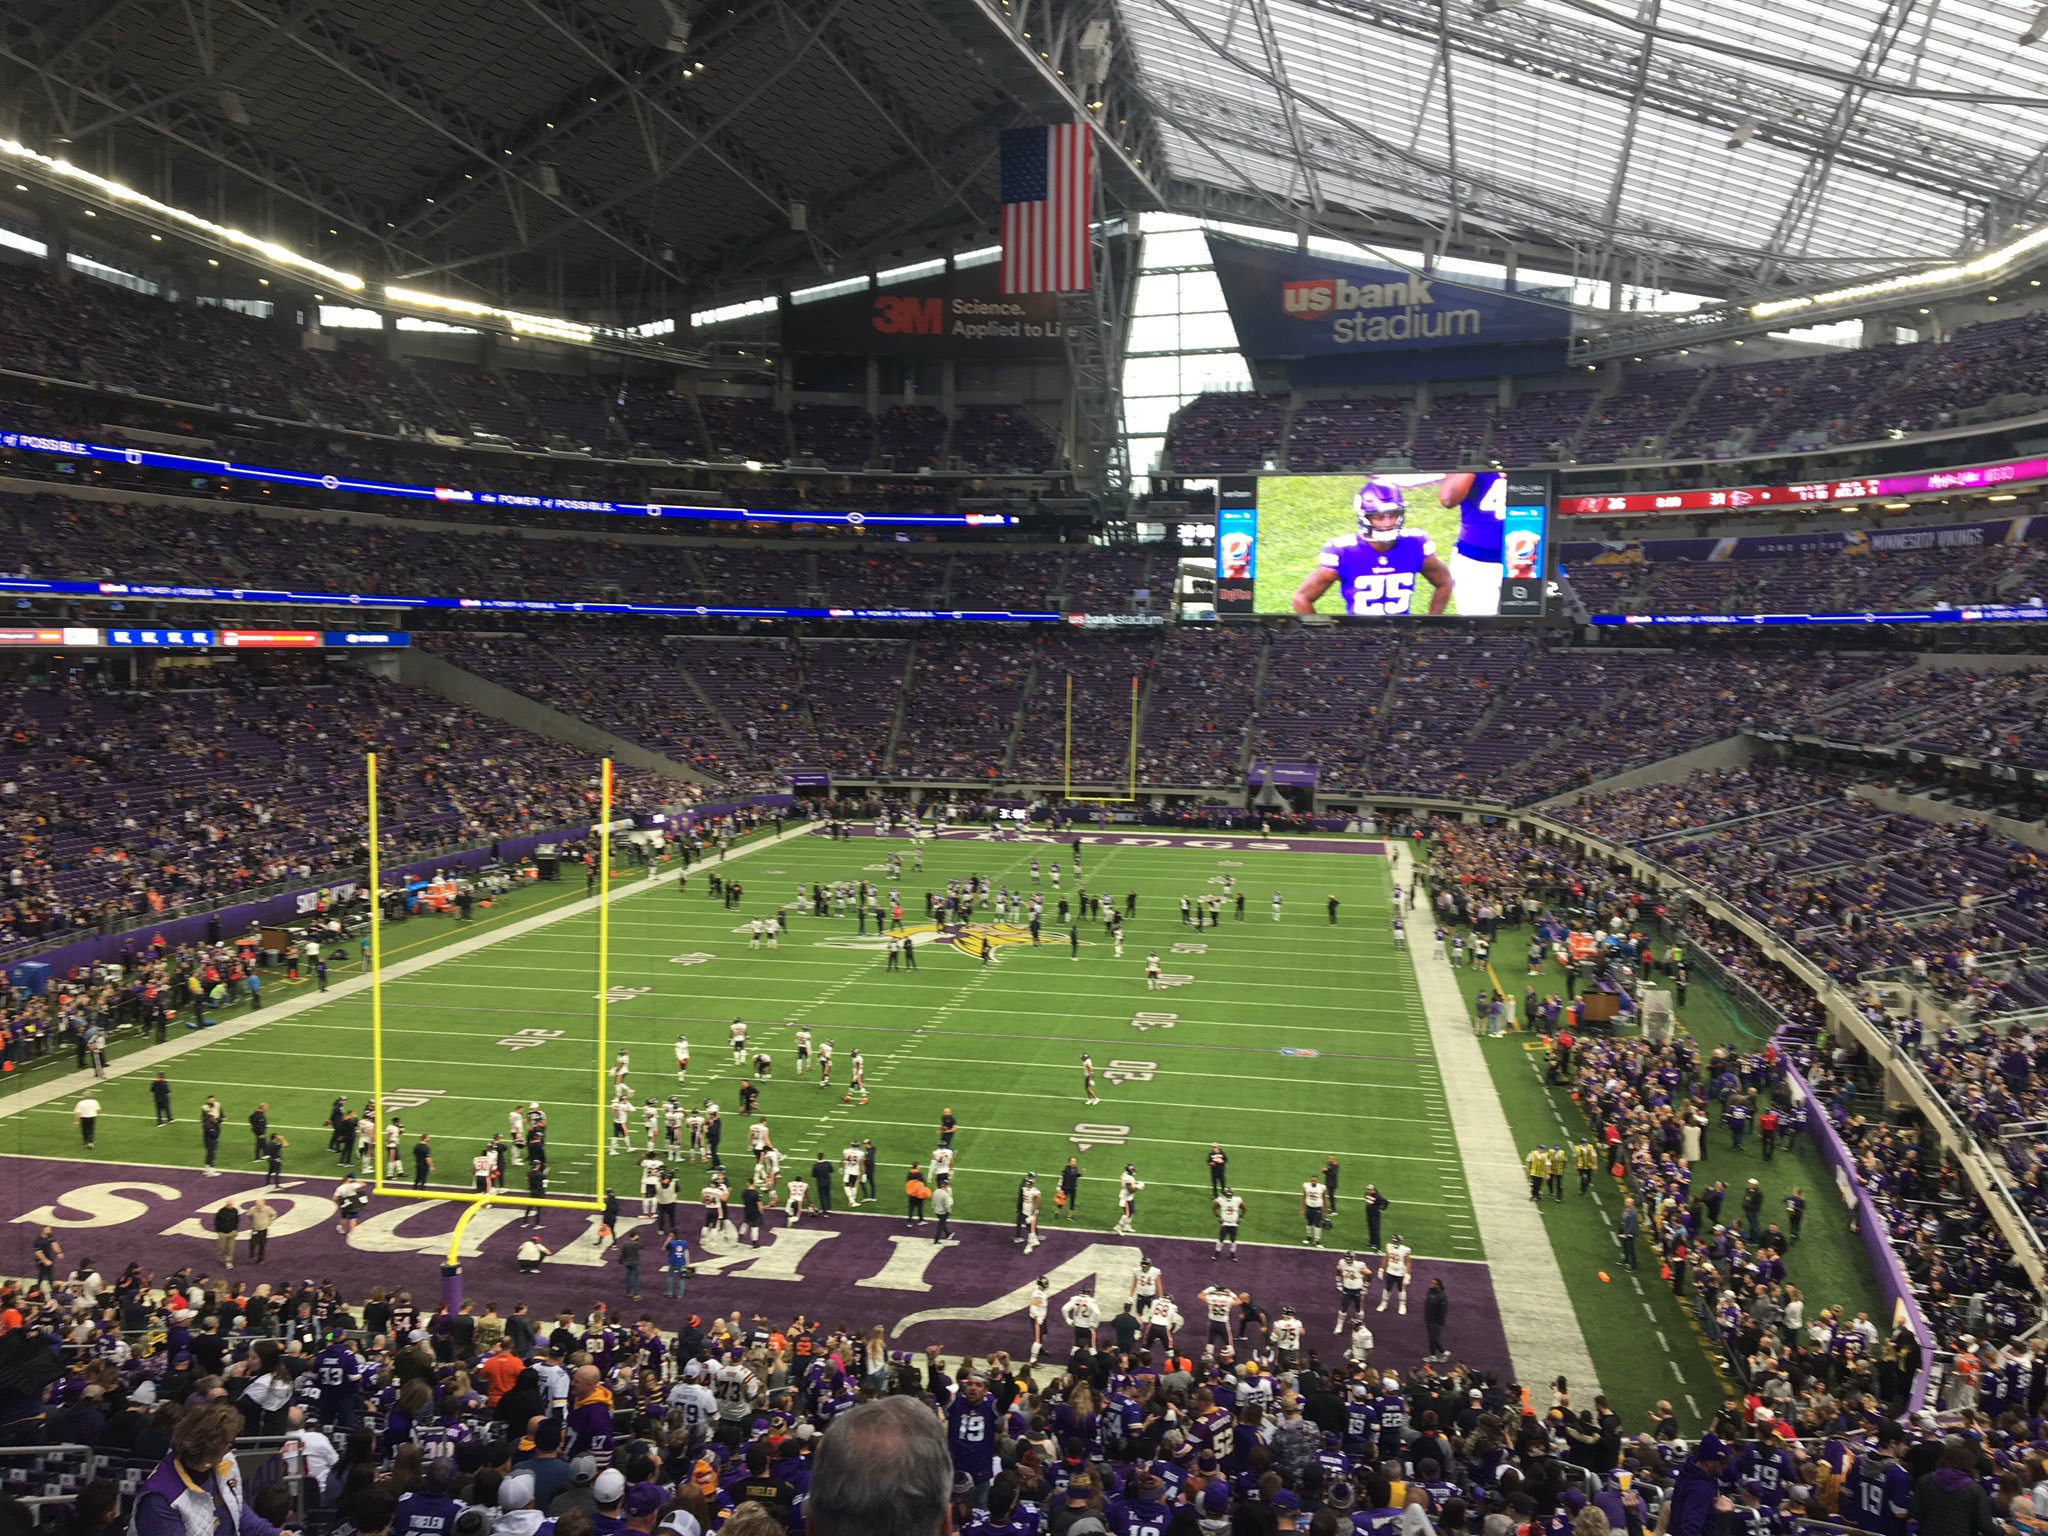 View from the lower level seats at U.S. Bank Stadium during a Minnesota Vikings game.